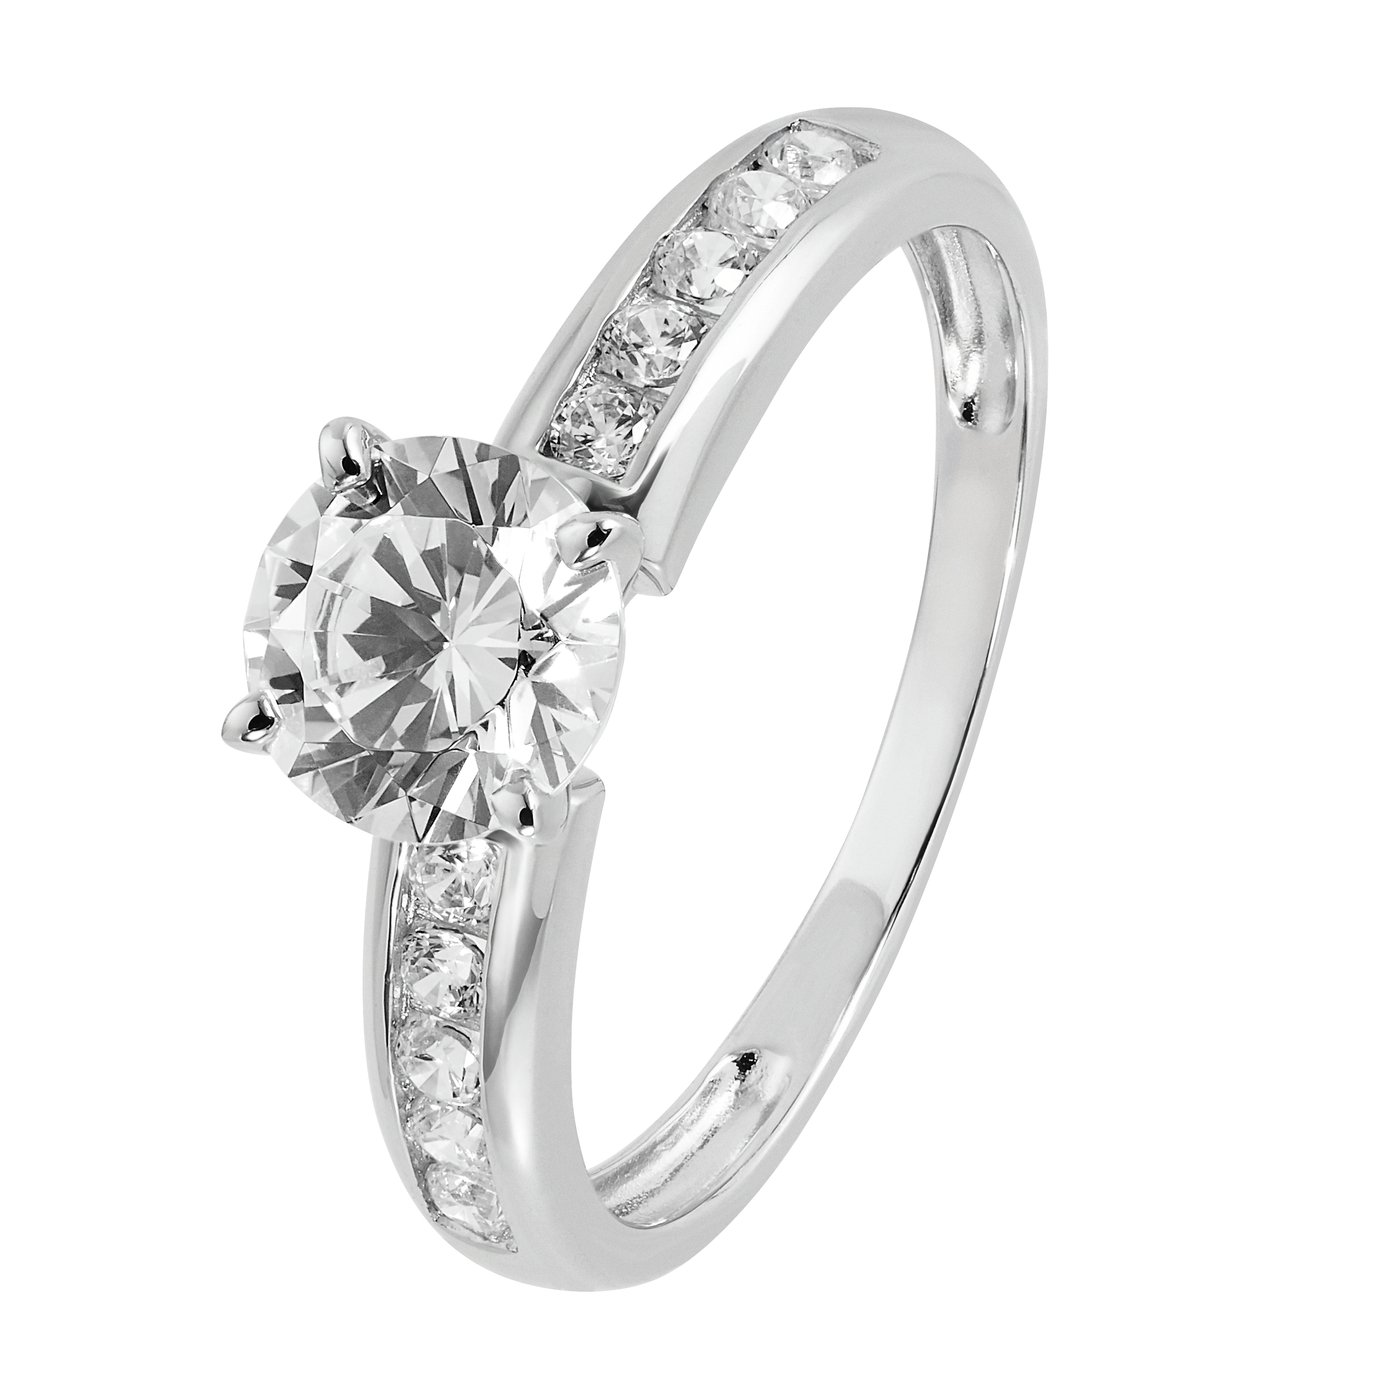 Revere 9ct White Gold Cubic Zirconia Engagement Ring - L